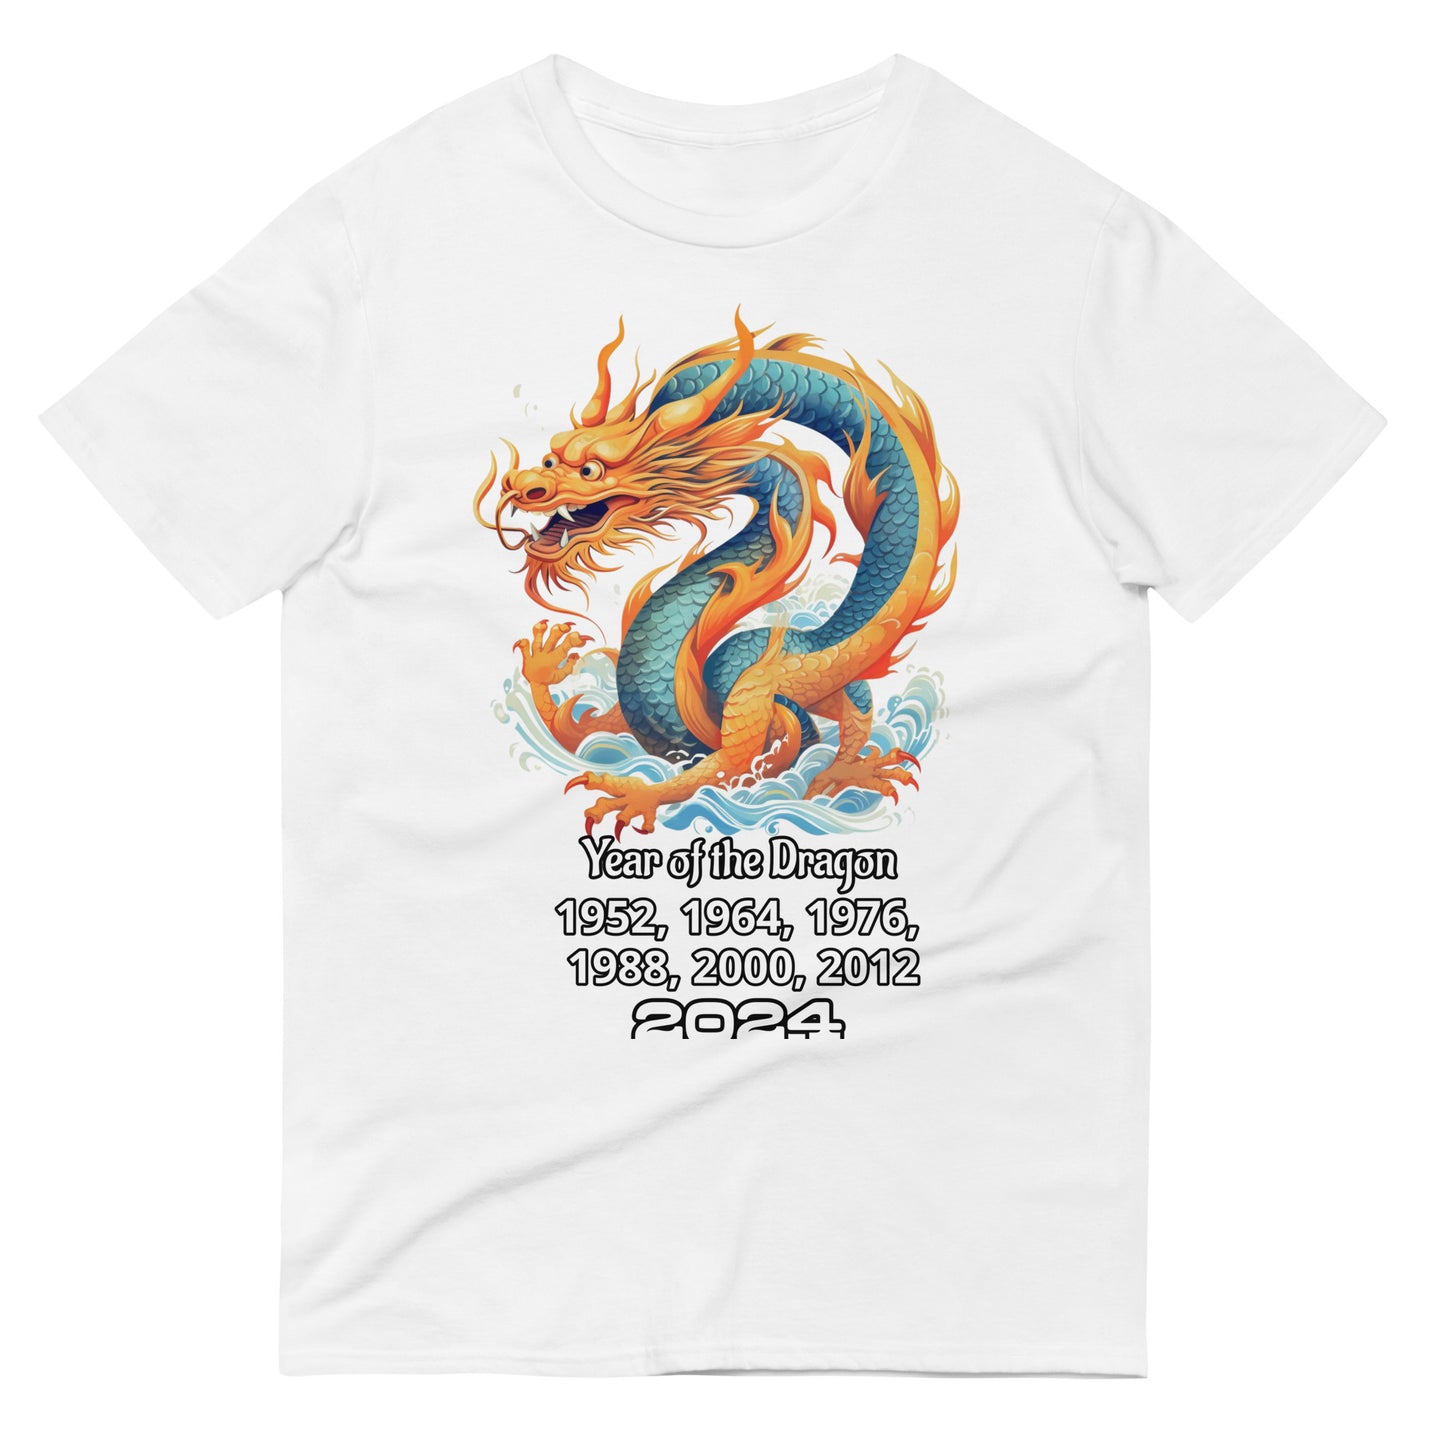 Year of the Dragon Short-Sleeve T-Shirt